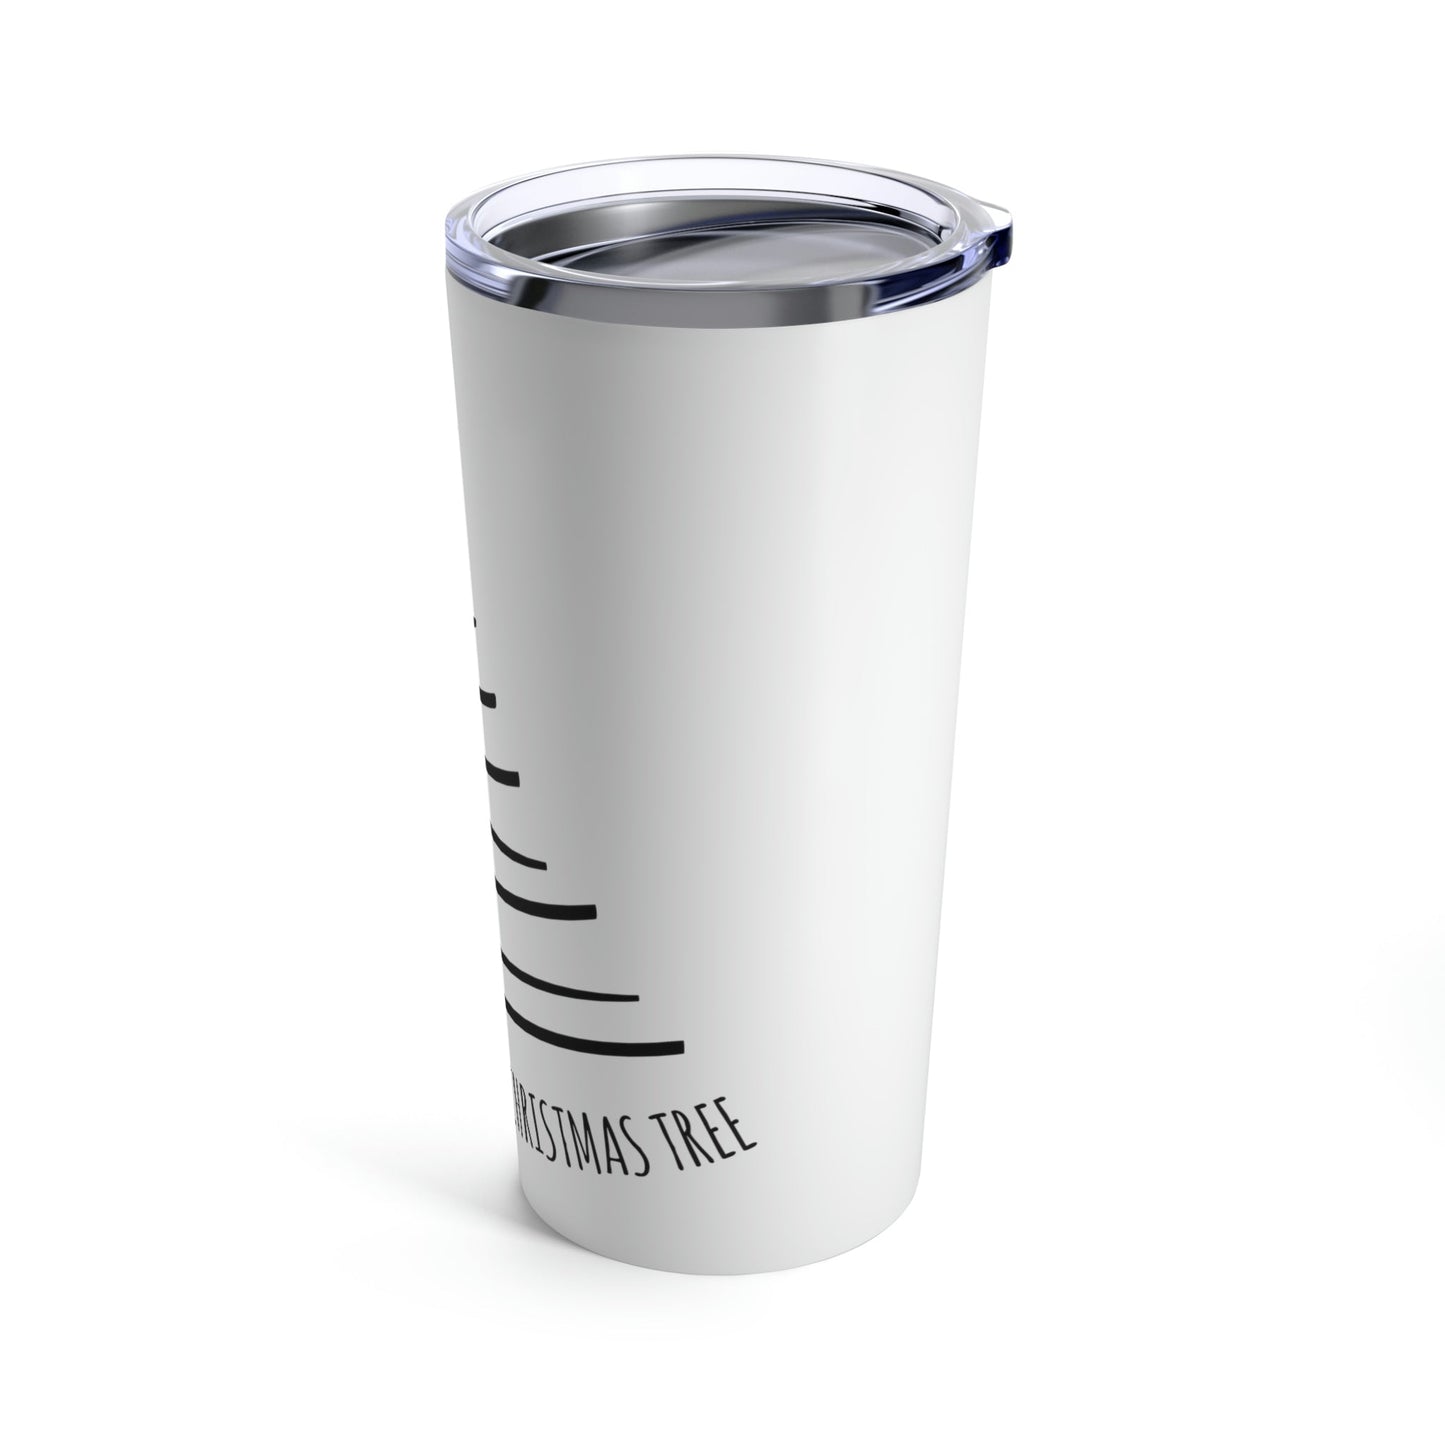 I've Picked You A Christmas Tree Happy Holidays Minimal Art Stainless Steel Hot or Cold Vacuum Tumbler 20oz Ichaku [Perfect Gifts Selection]